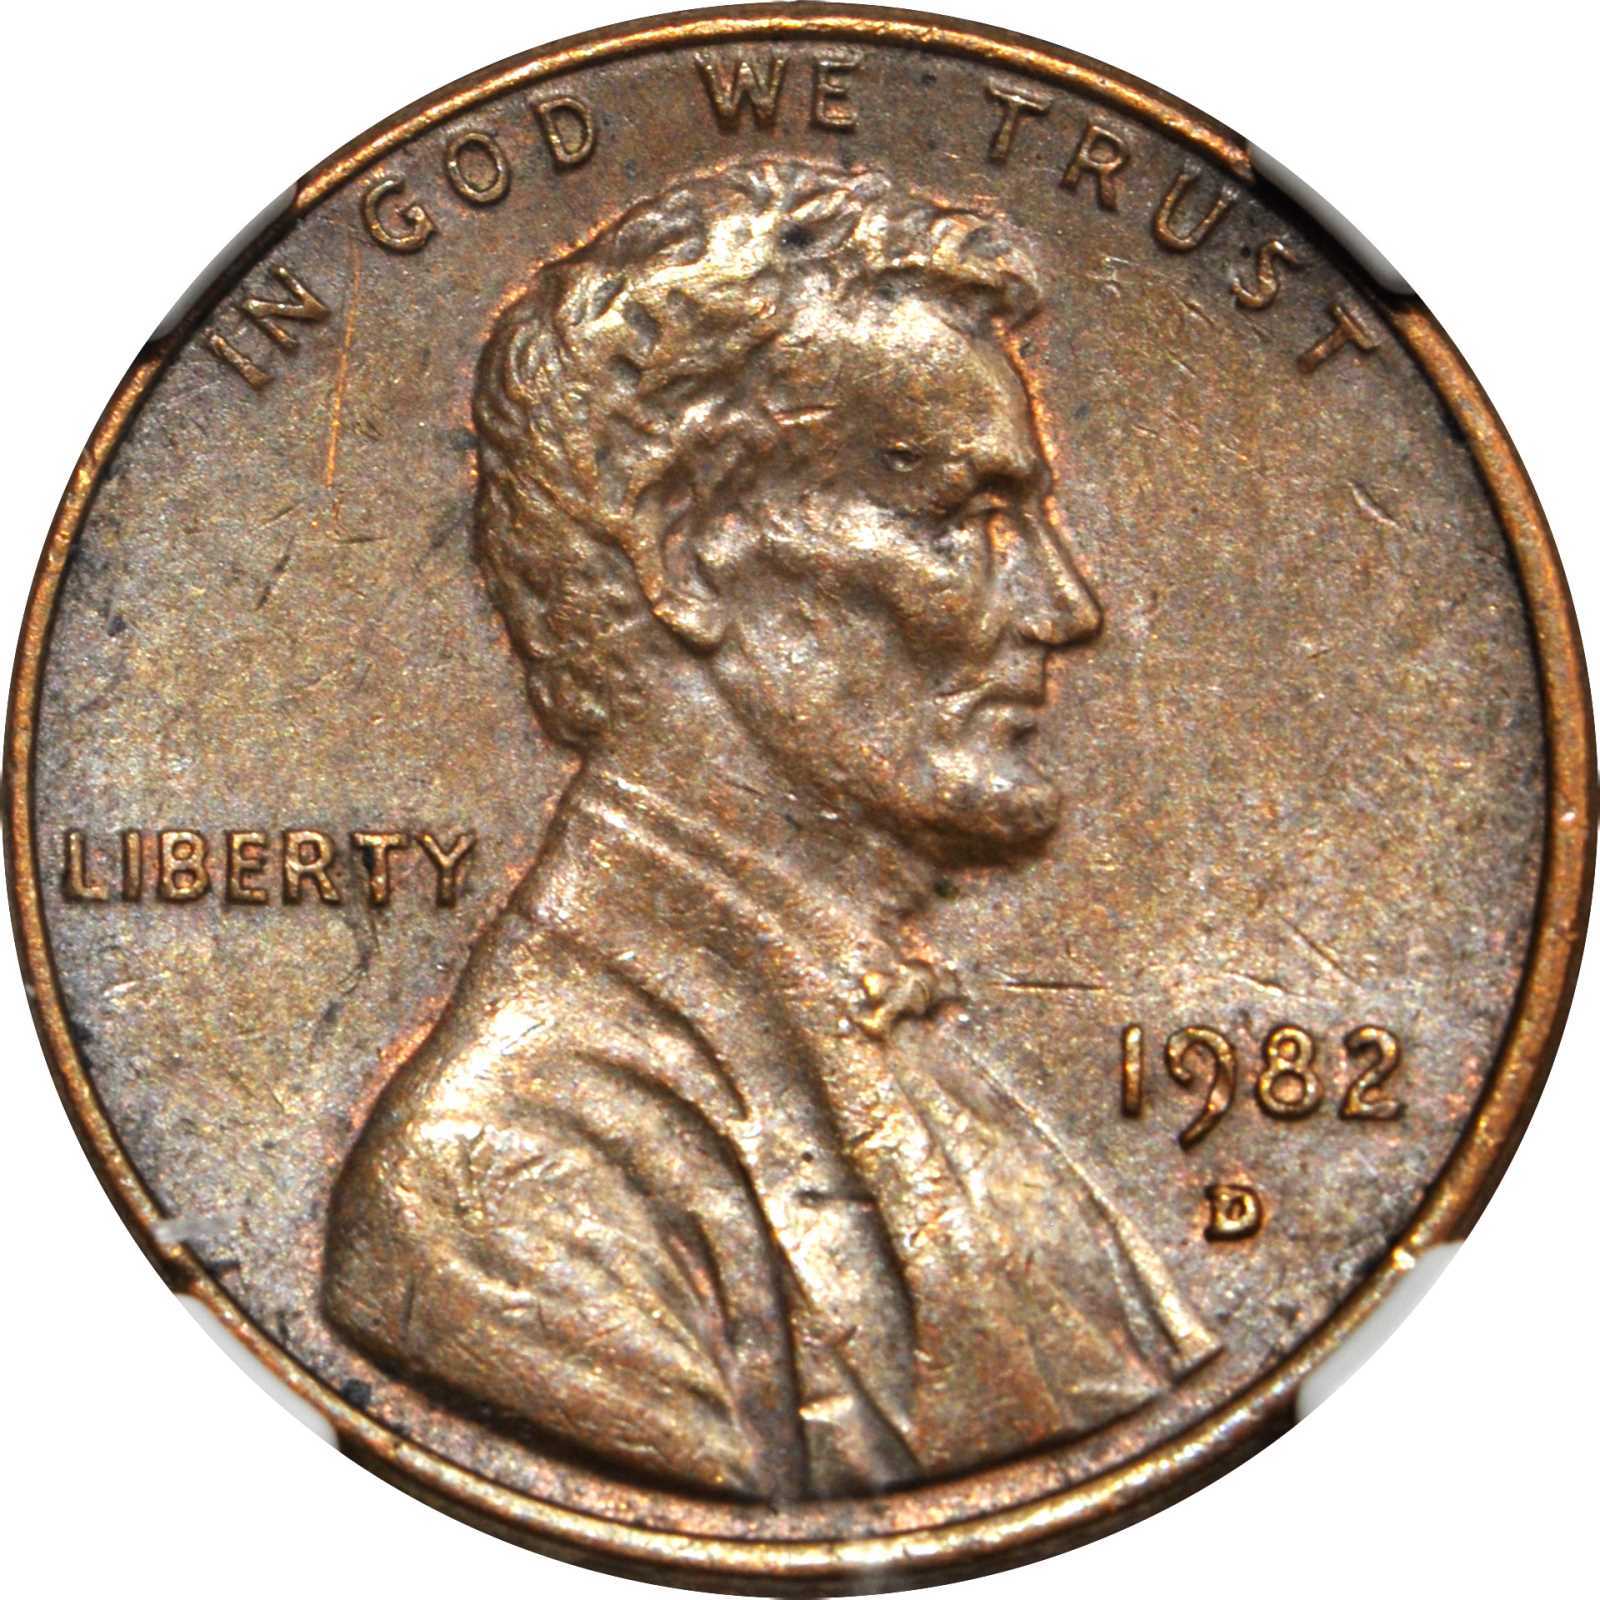 Details about   1982 P LINCOLN CENT SMALL DATE C0PPER GEM RED BU 